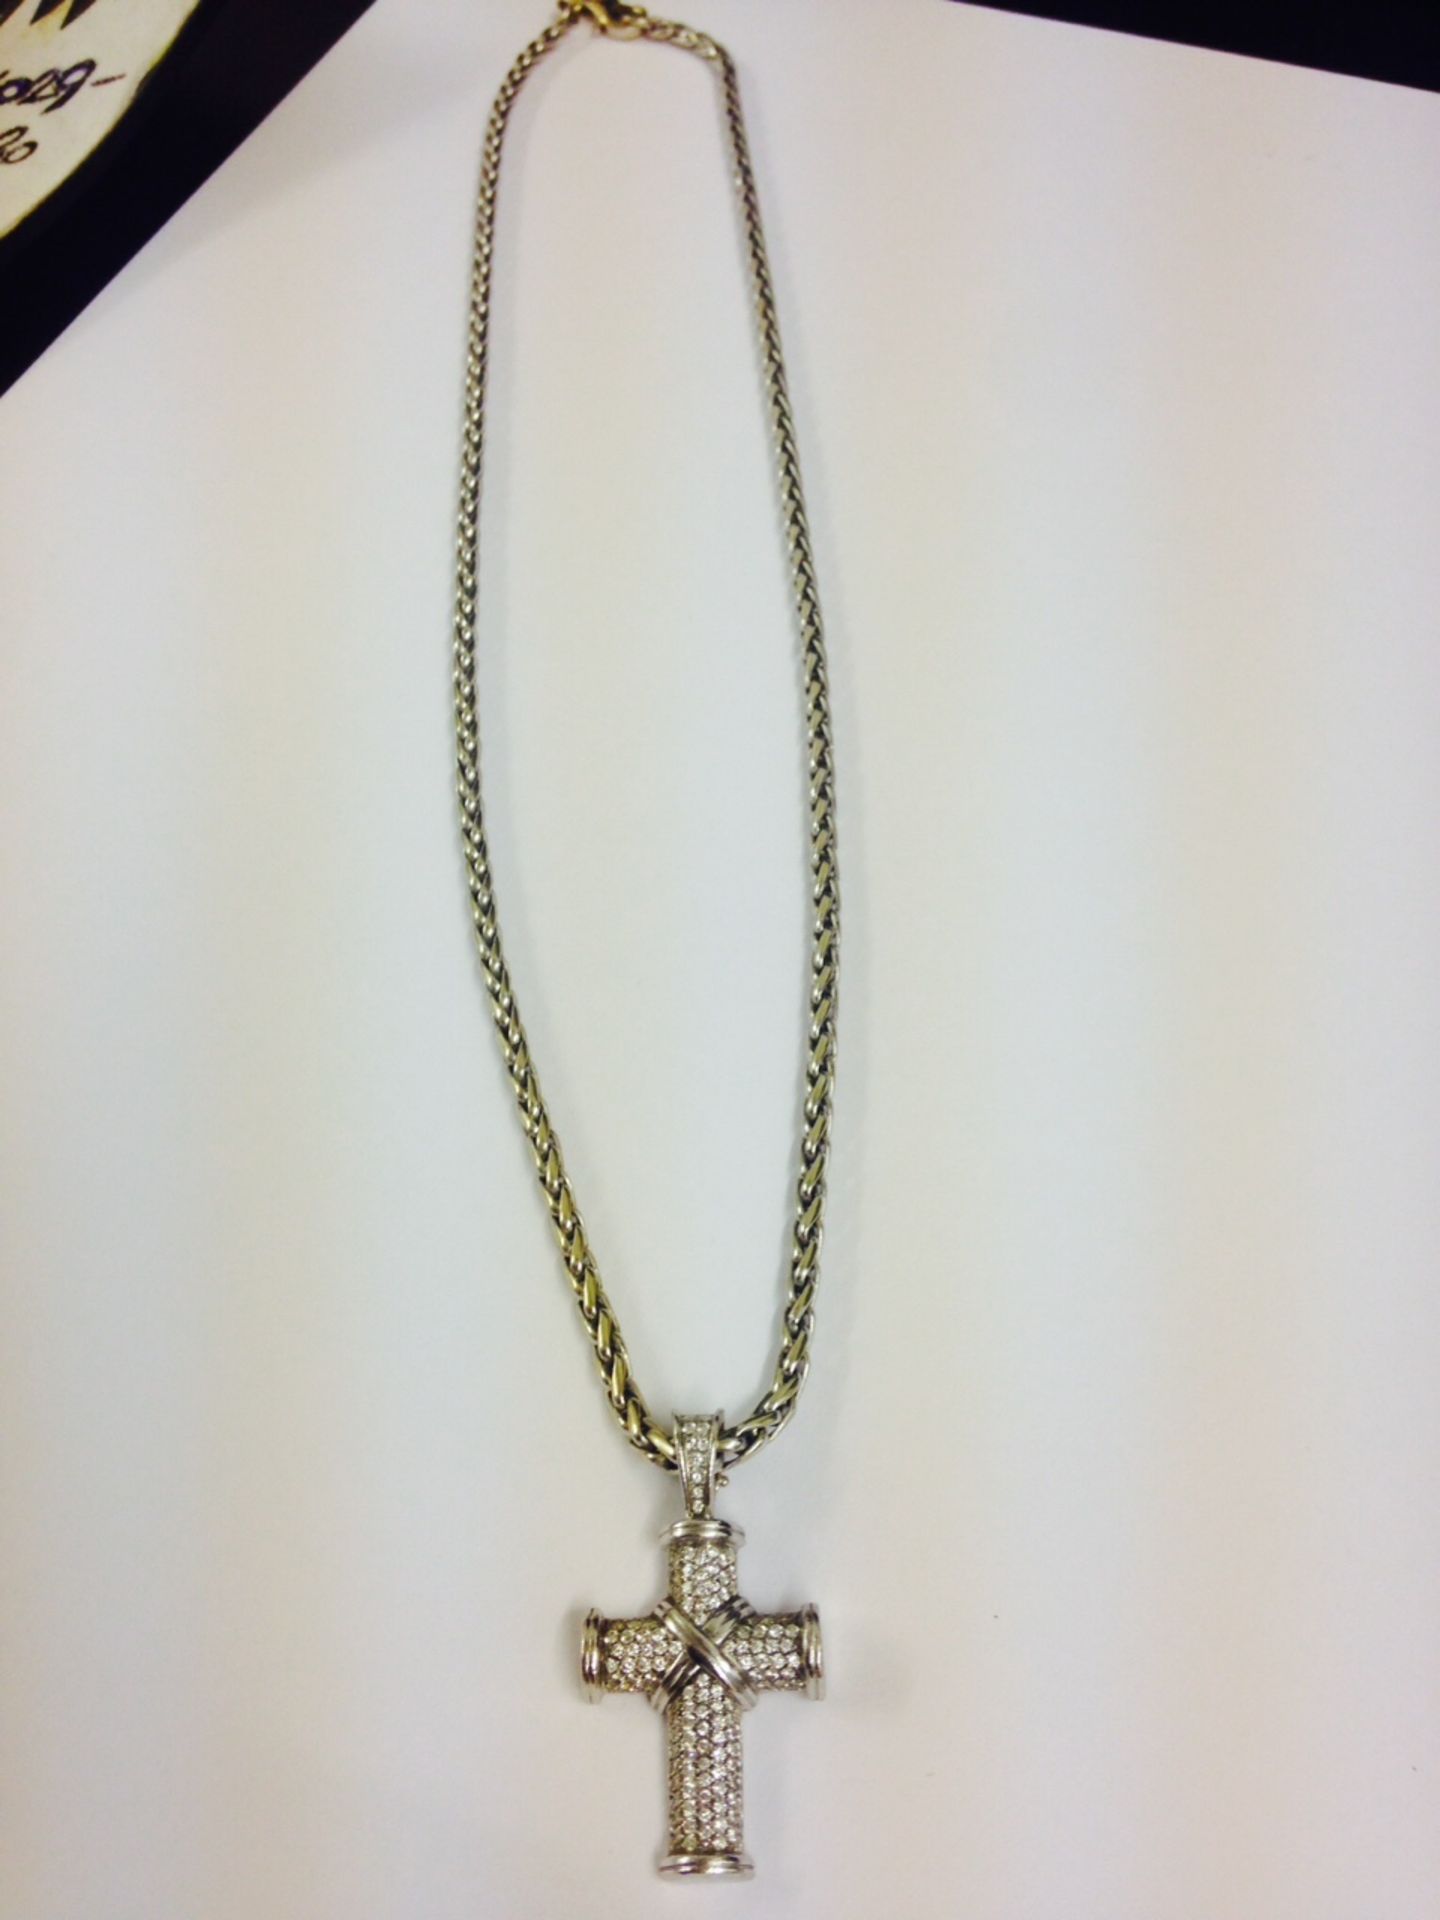 18 carat white gold Theo fennell diamond cross and chain, RRP £10,500.00